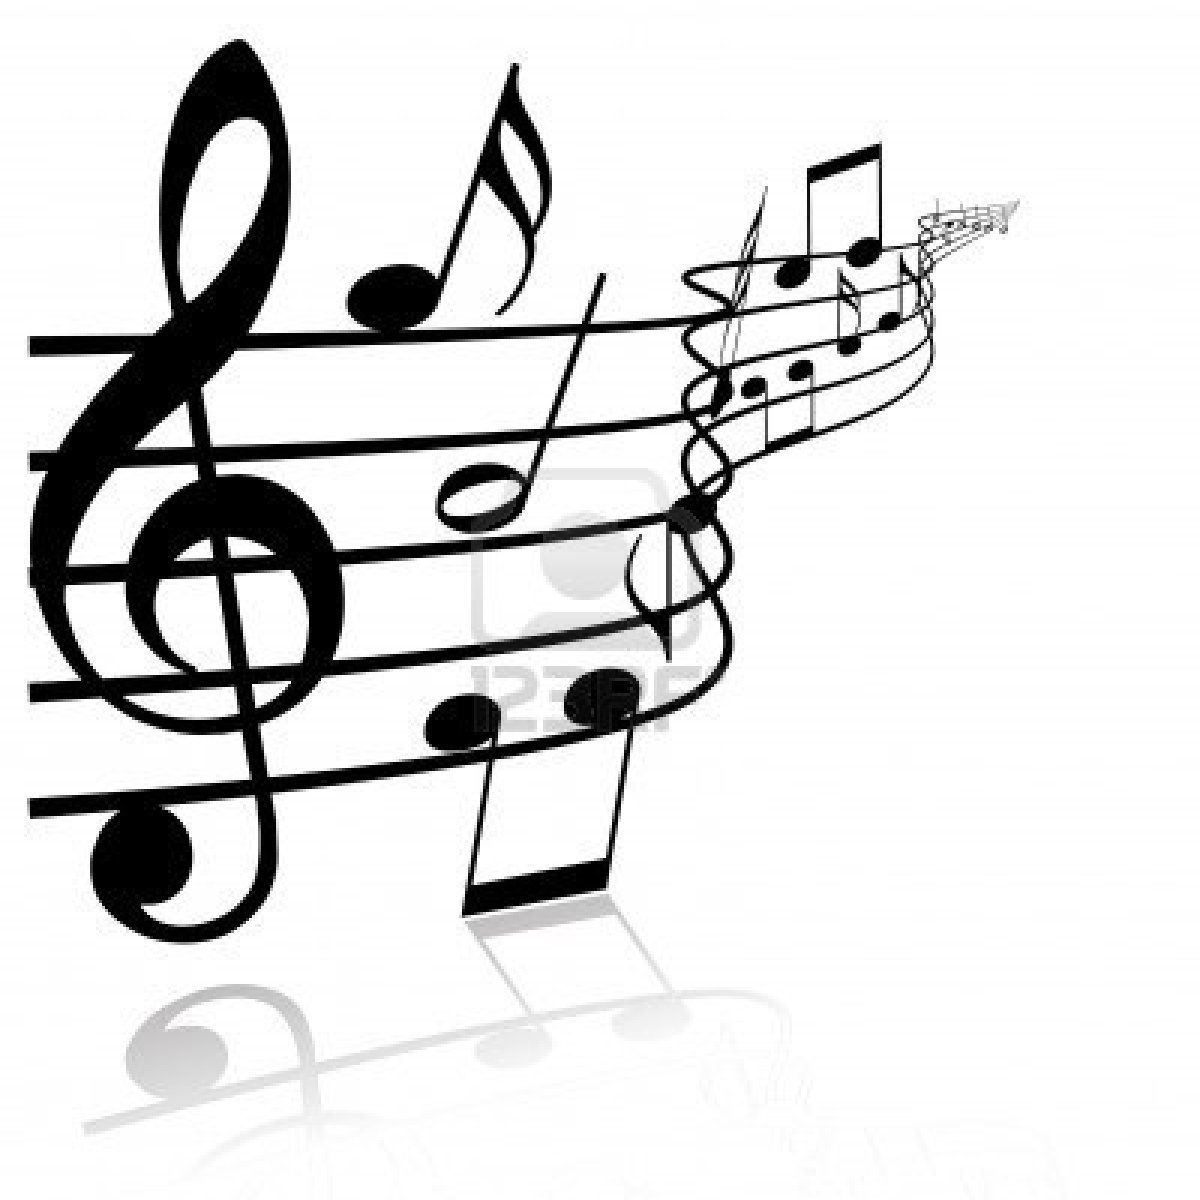 Black music notes clipart